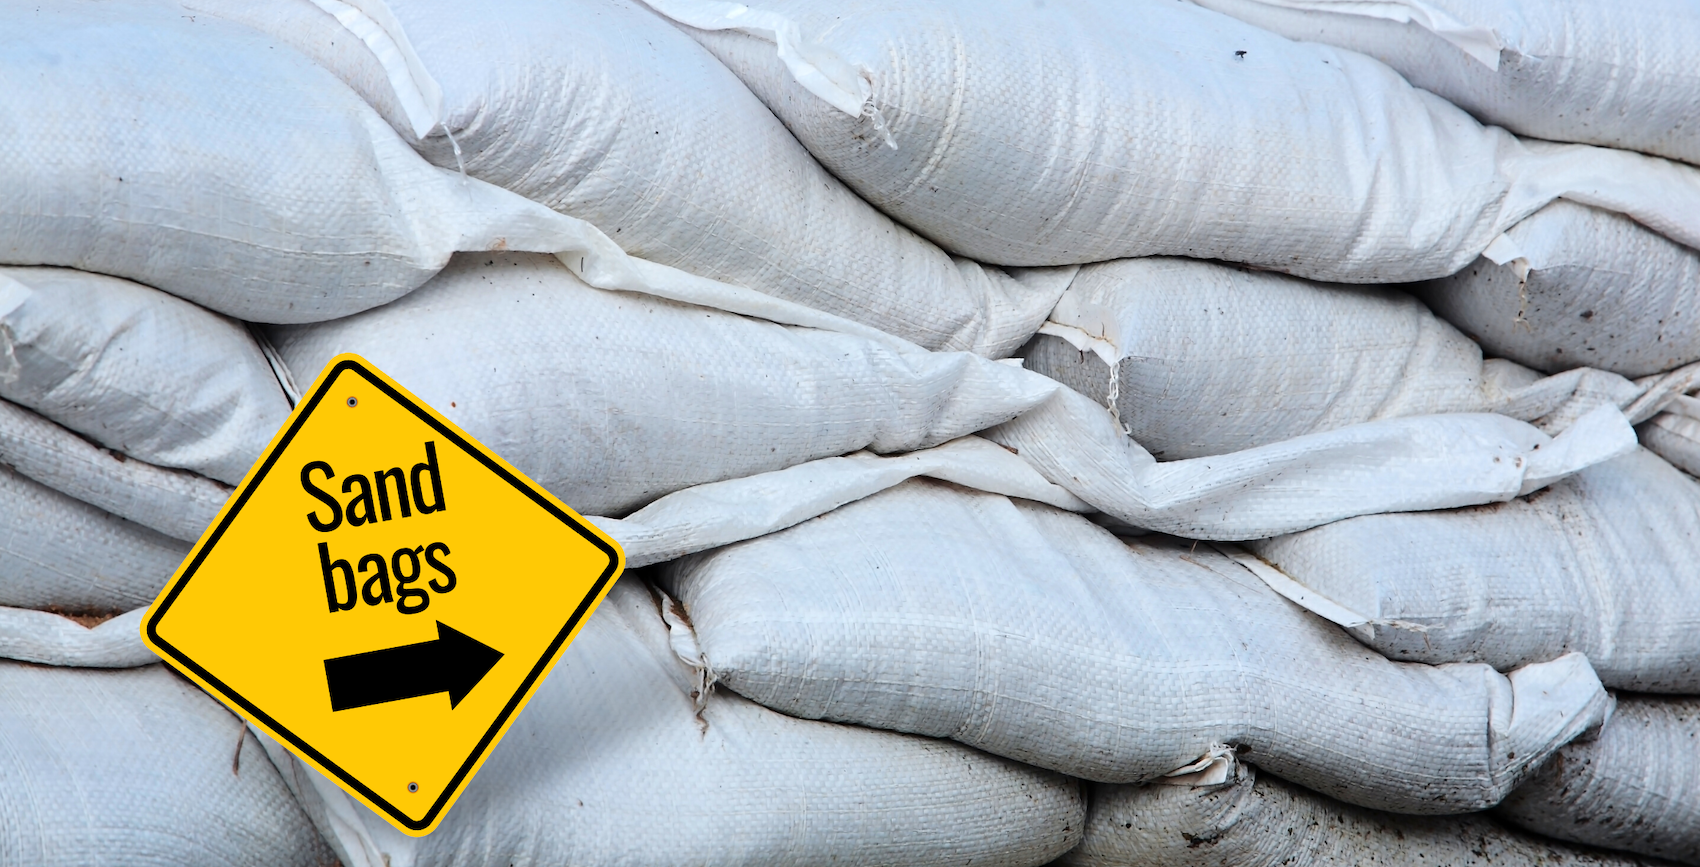 Image of sand bags